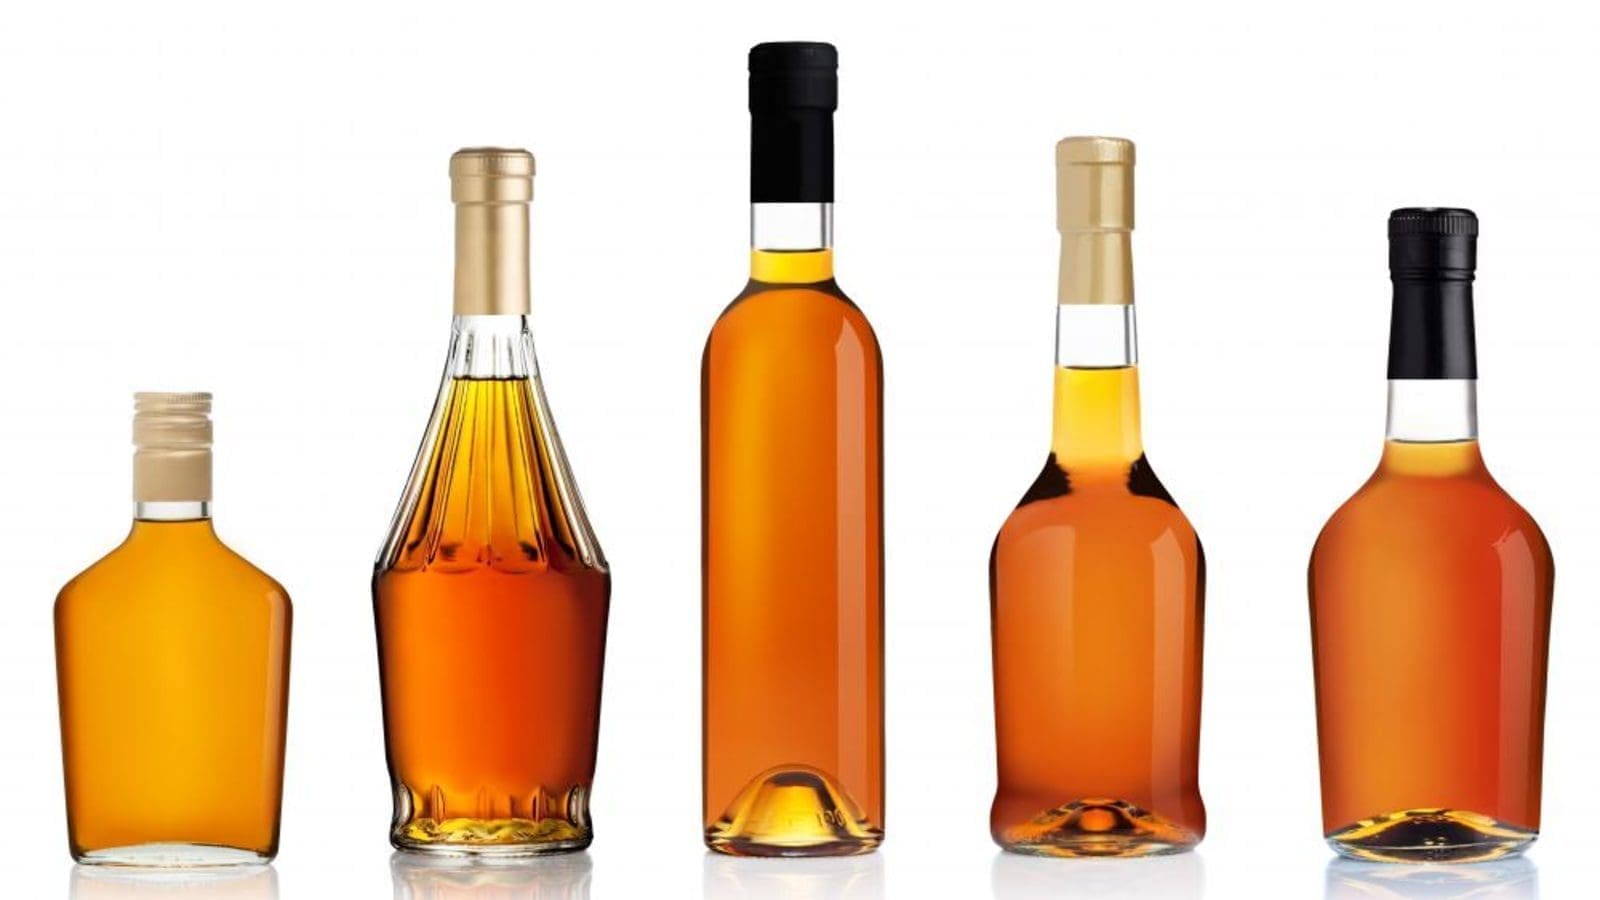 #BeverageGoodFriday: New products from Constellation Brands, Avaline, Macallan, English Whisky Company